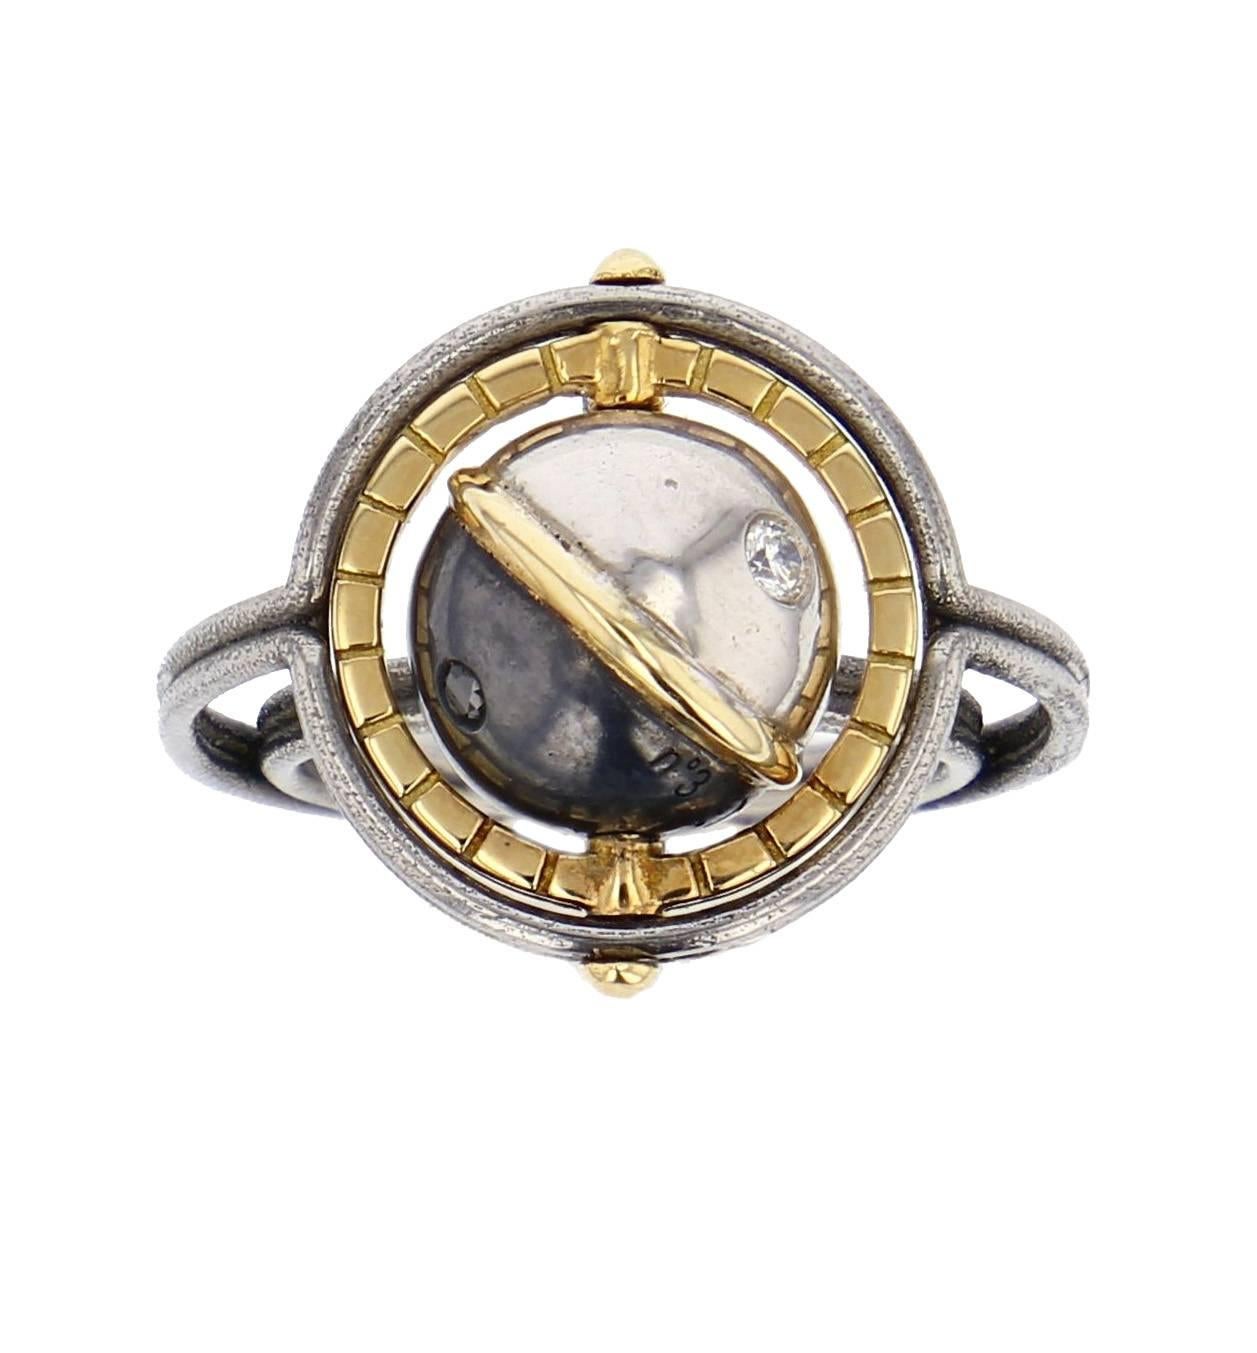 MIR Ring Gold Silver Diamonds

Gold ring made of 2 polished steel bands, carrying a white gold and patinated silver globe, circled in yellow gold. This moving planet is set with white and black diamonds, and a yellow gold satellite rotating around.